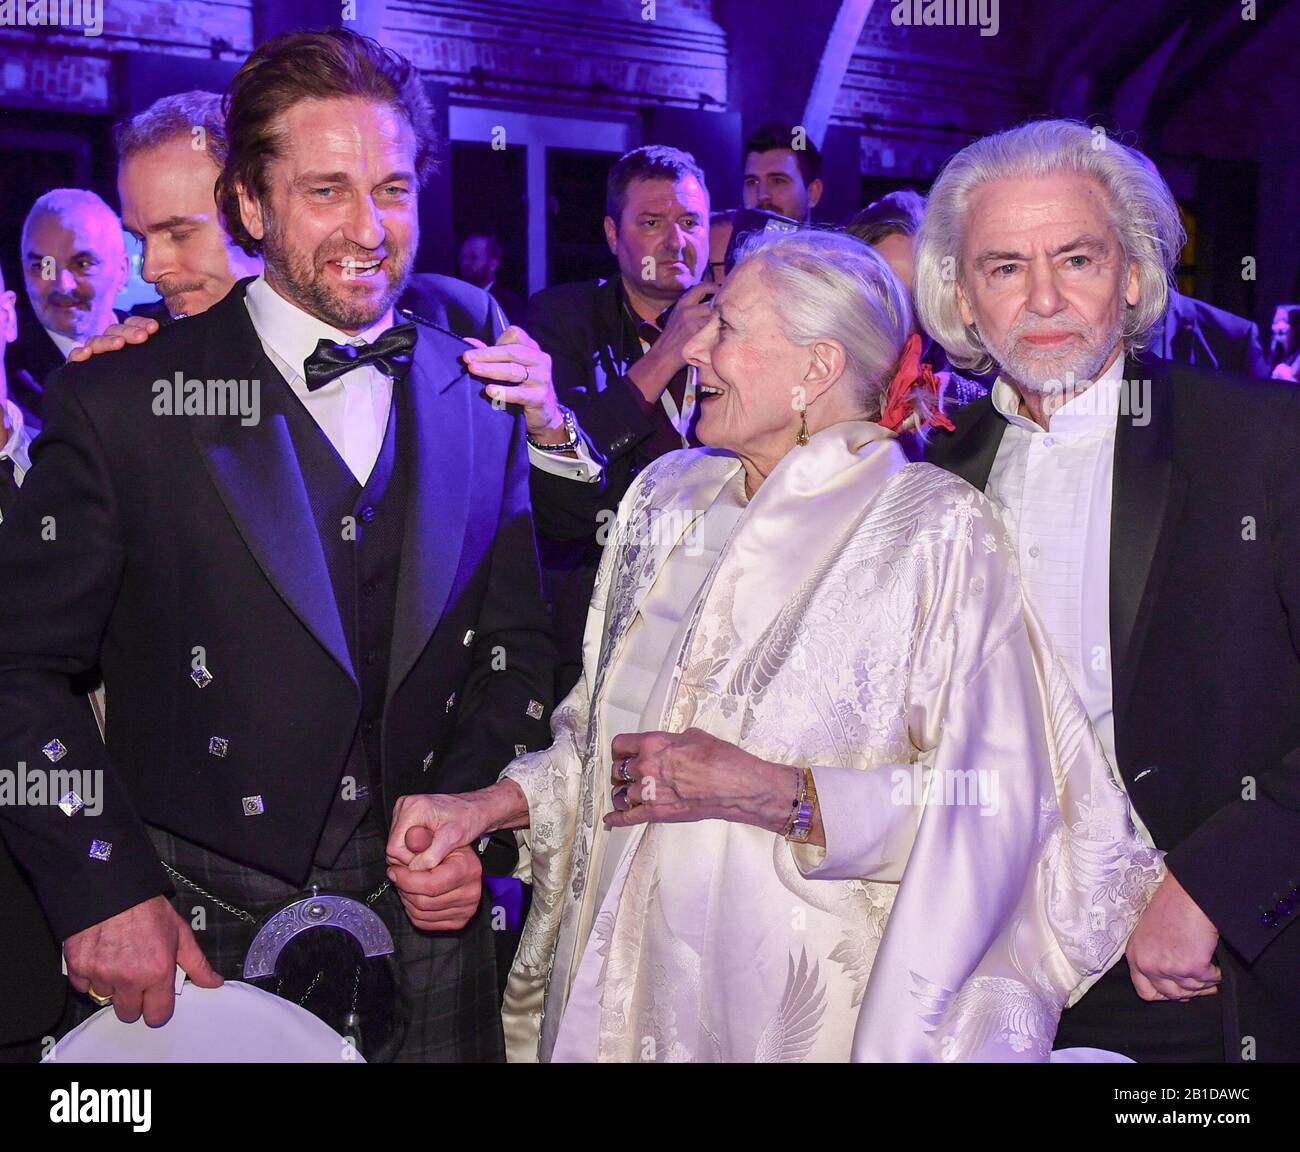 Berlin, Germany. 23rd Feb, 2020. 70th Berlinale, Cinema for Peace Gala: Carlo Gabriel Nero (l-r), the son of Vanessa Redgrave and Franco Nero, actor Gerard Butler, director Vanessa Redgrave and Hermann Bühlbecker The International Film Festival takes place from 20.02. to 01.03.2020. Credit: Jens Kalaene/dpa-Zentralbild/dpa/Alamy Live News Stock Photo